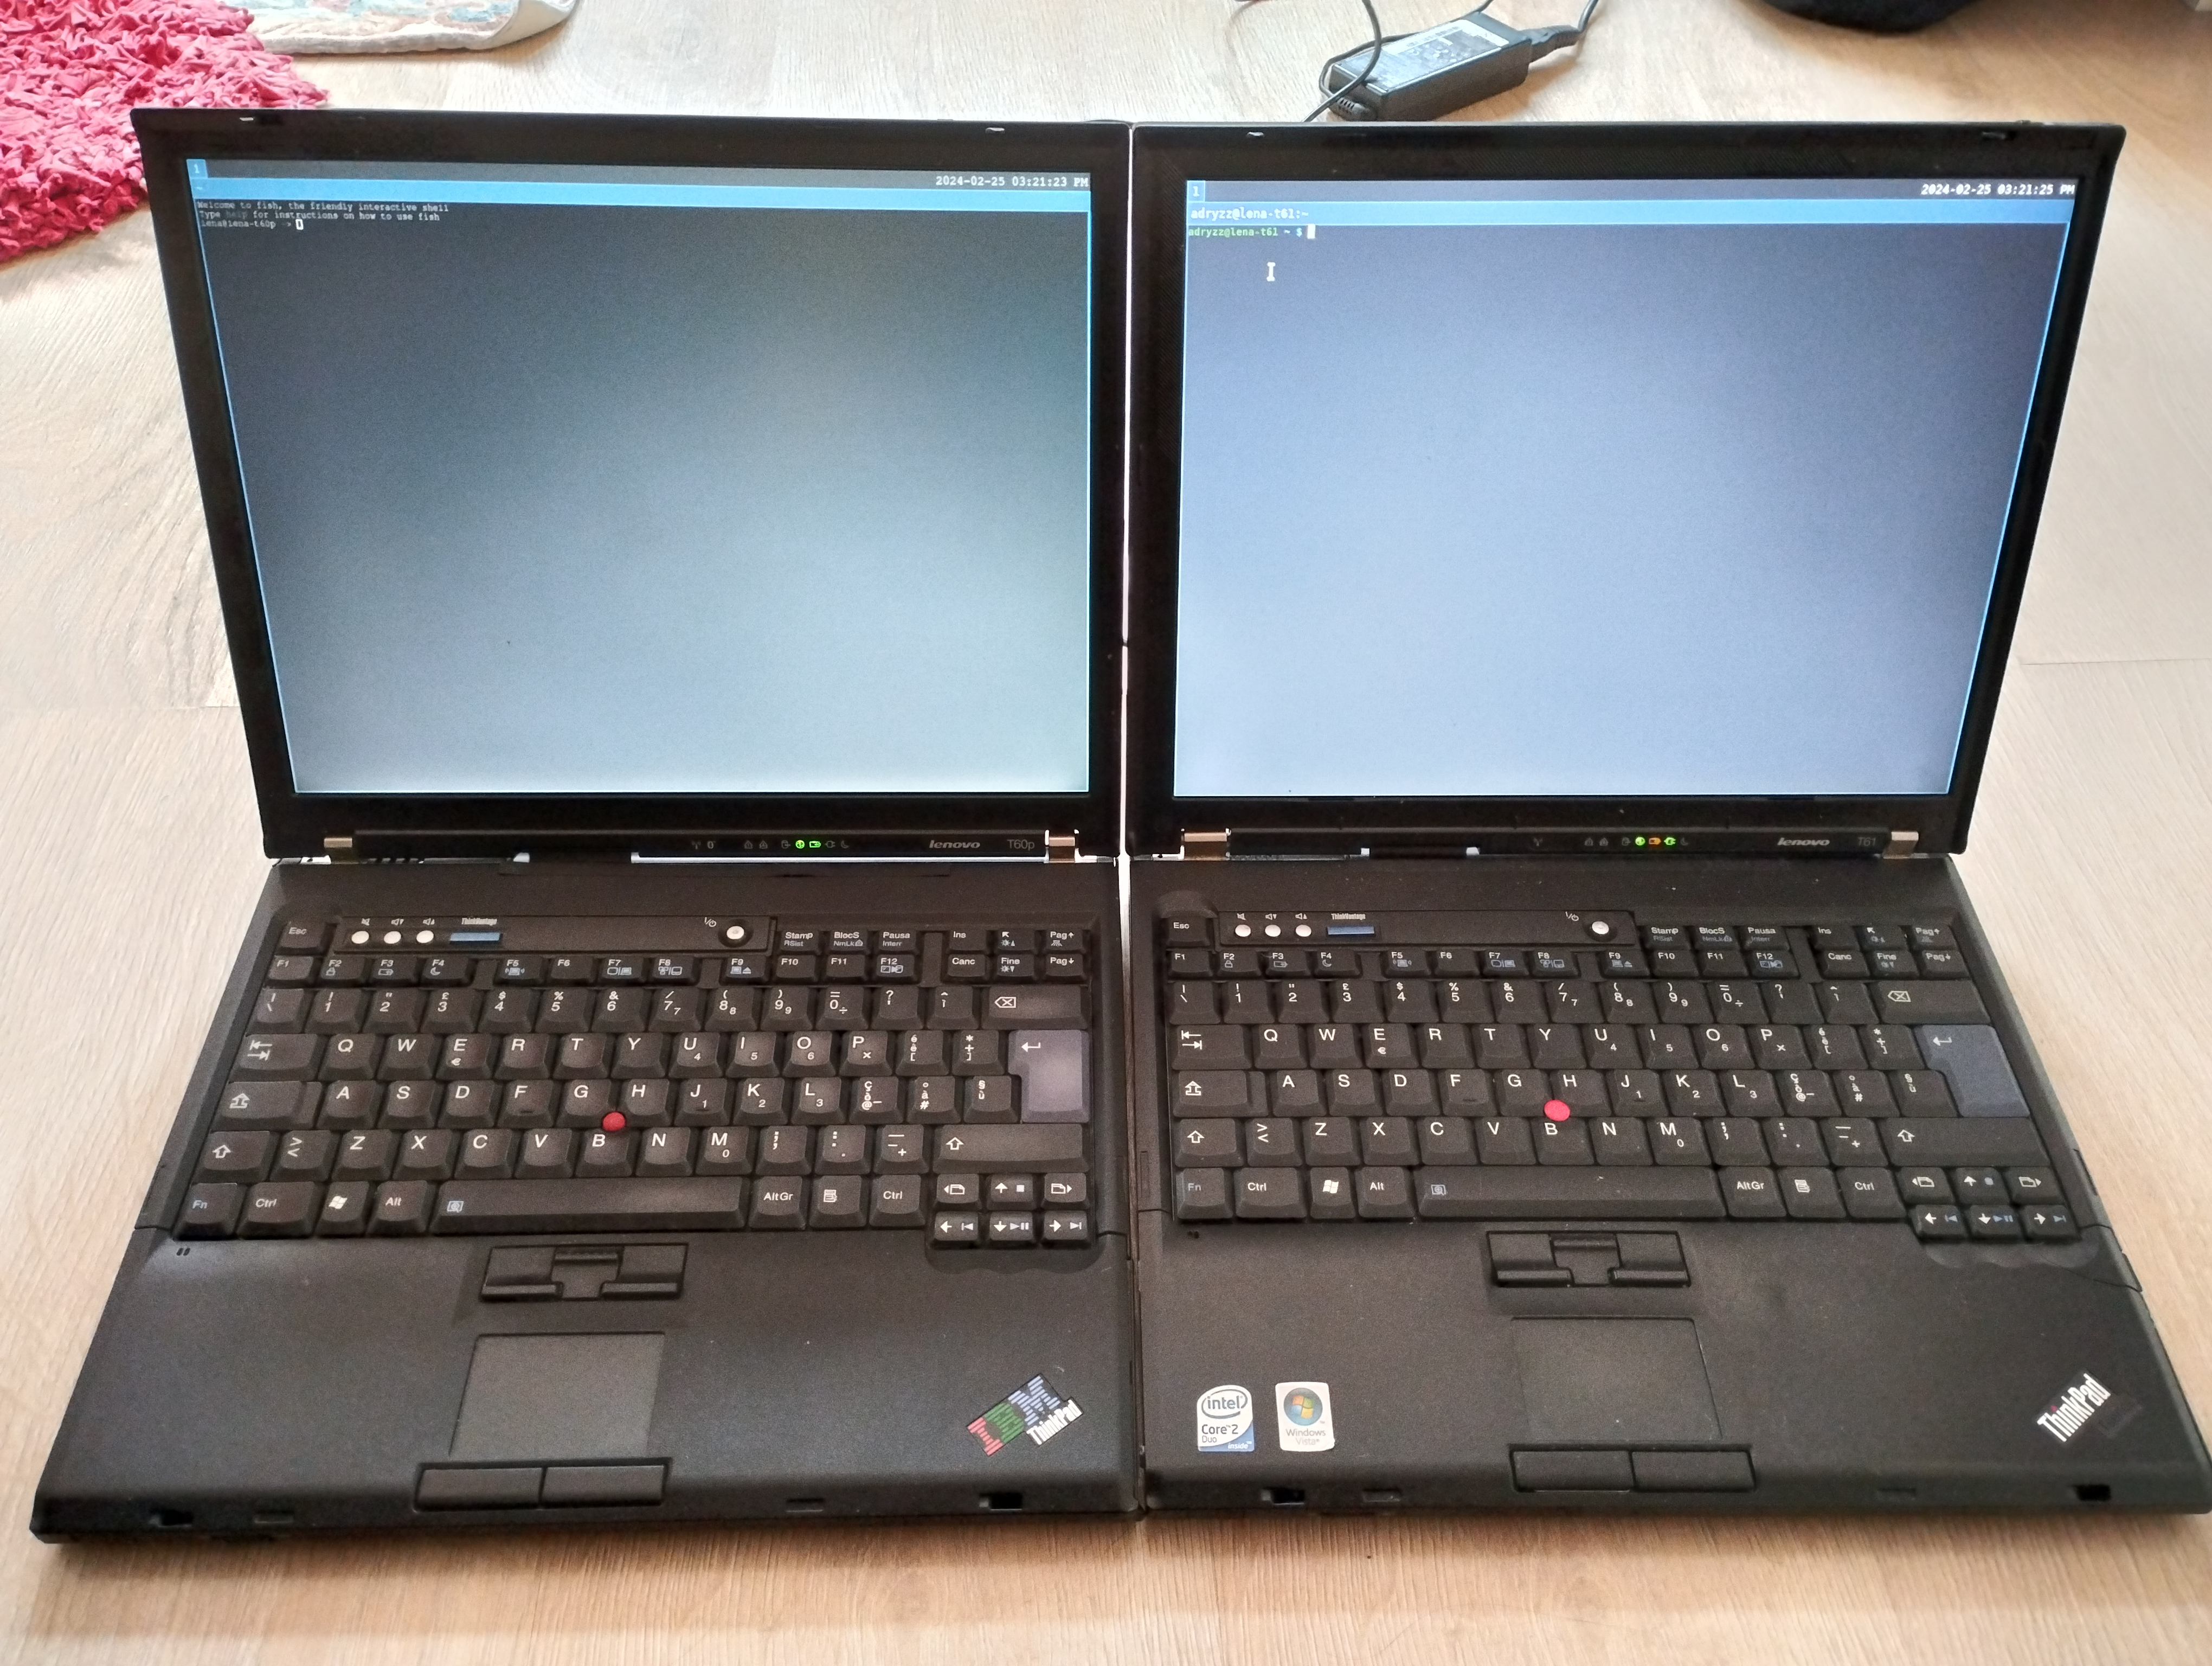 my ThinkPad T60p (on the left) and my thinkpad T61 (on the right), both running the Sway Wayland session